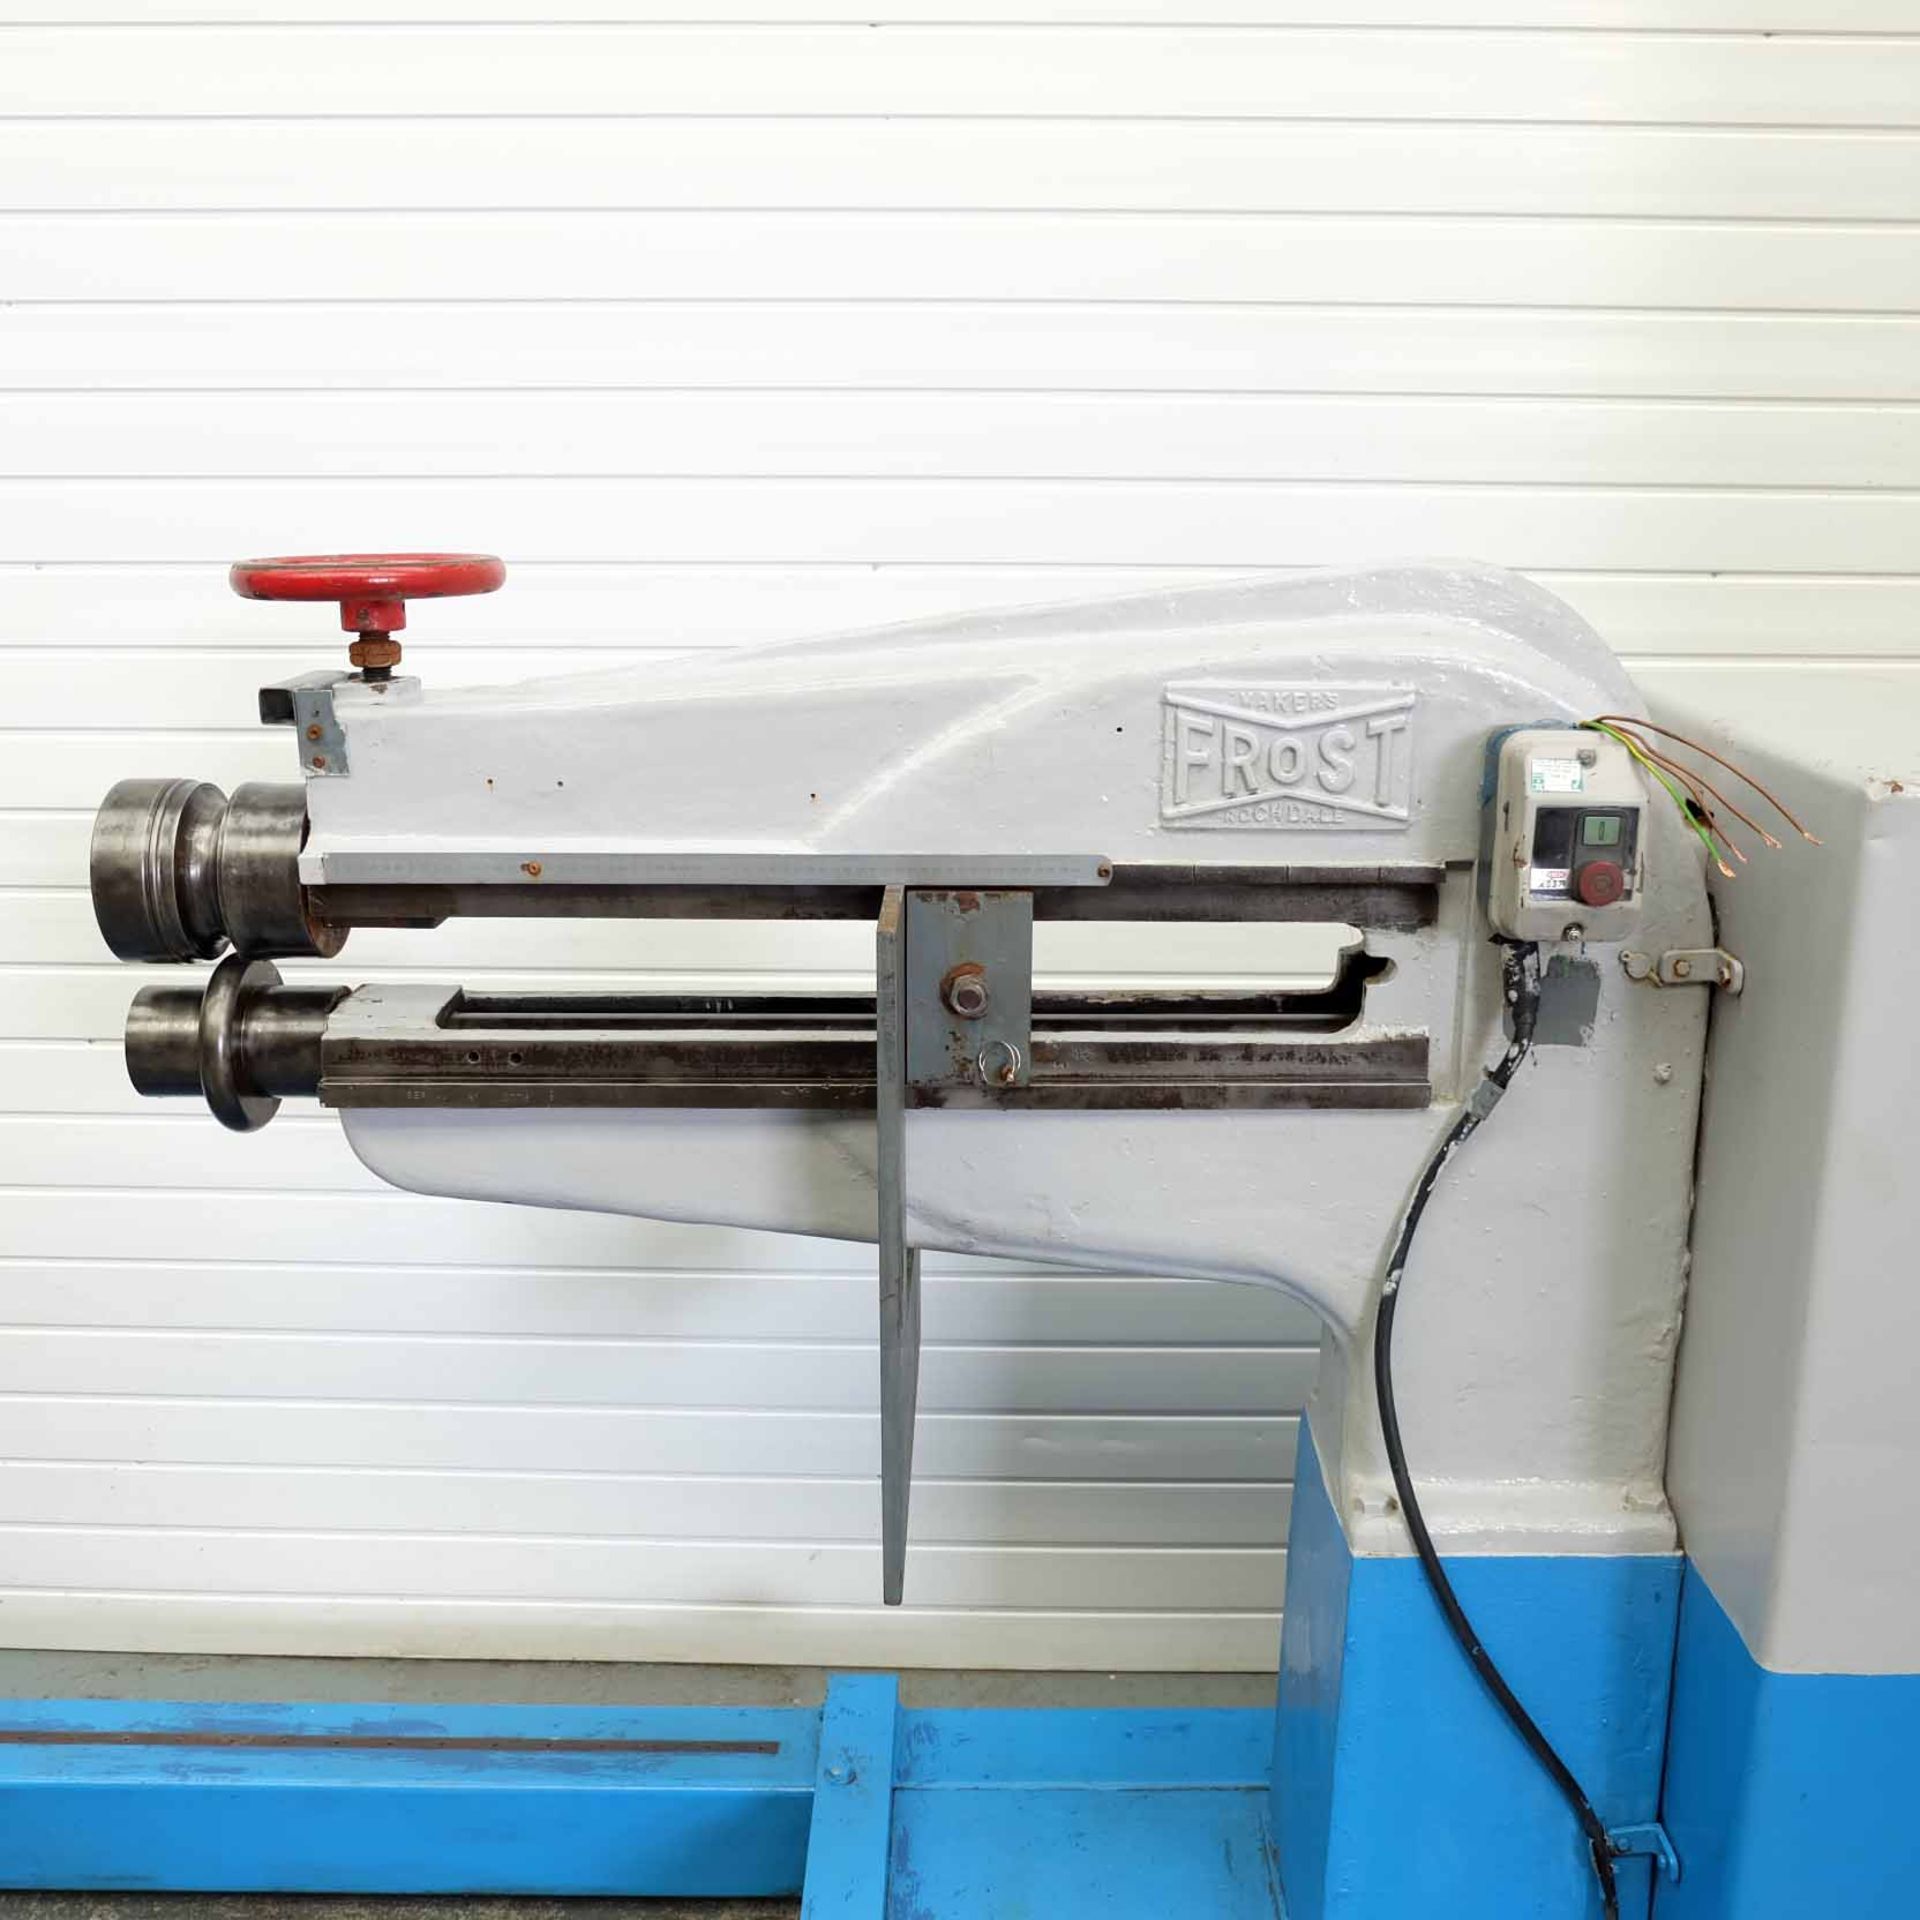 Frost Swaging Machine. Throat Depth 36" Approx. With Tailstock. Motor 3 Phase, 1 HP. - Image 3 of 10